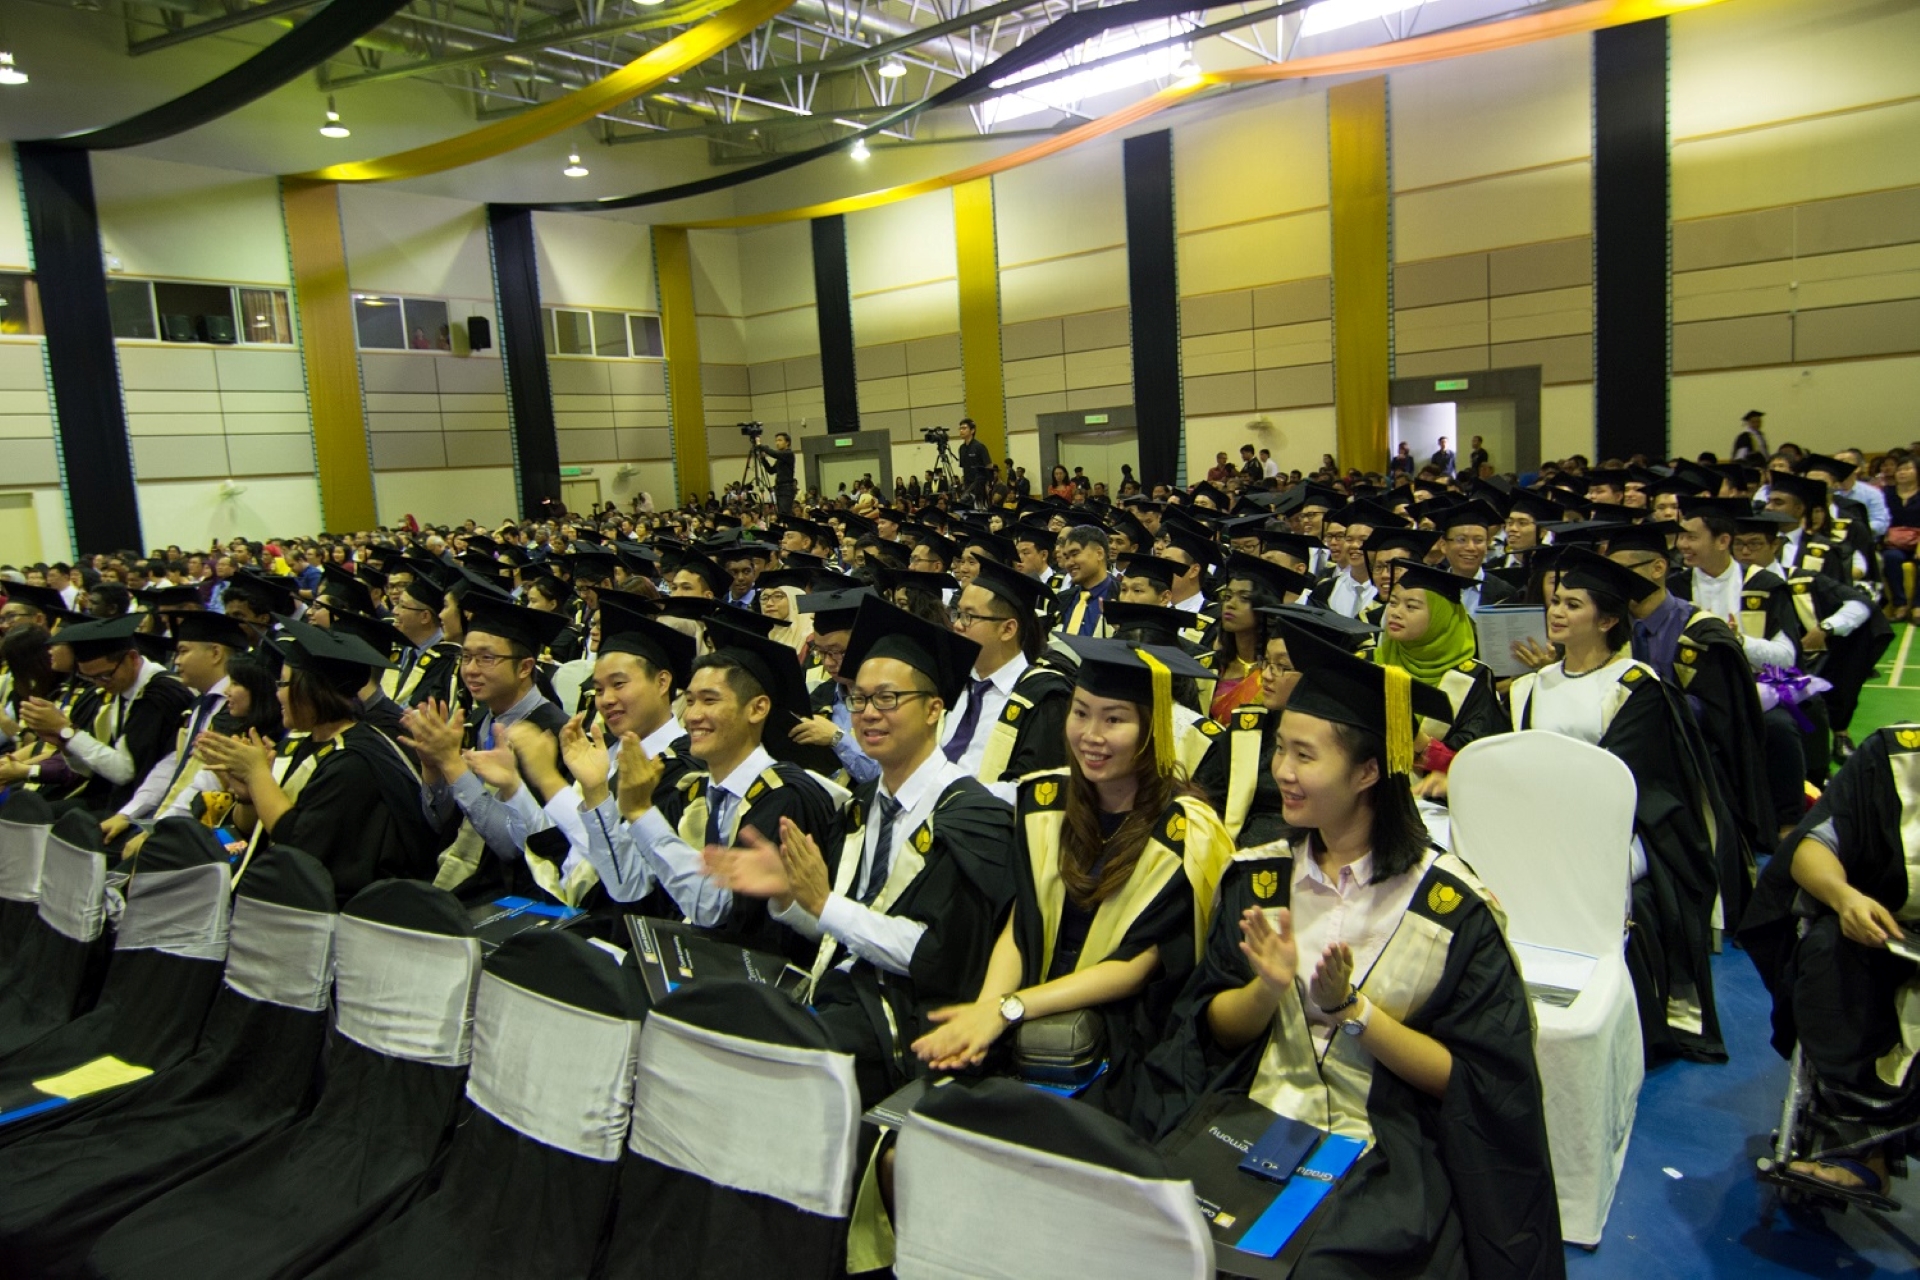 A room full of Curtin Singapore students sitting wearing academic gowns, sashes and mortarboards, appauding at their graduation.